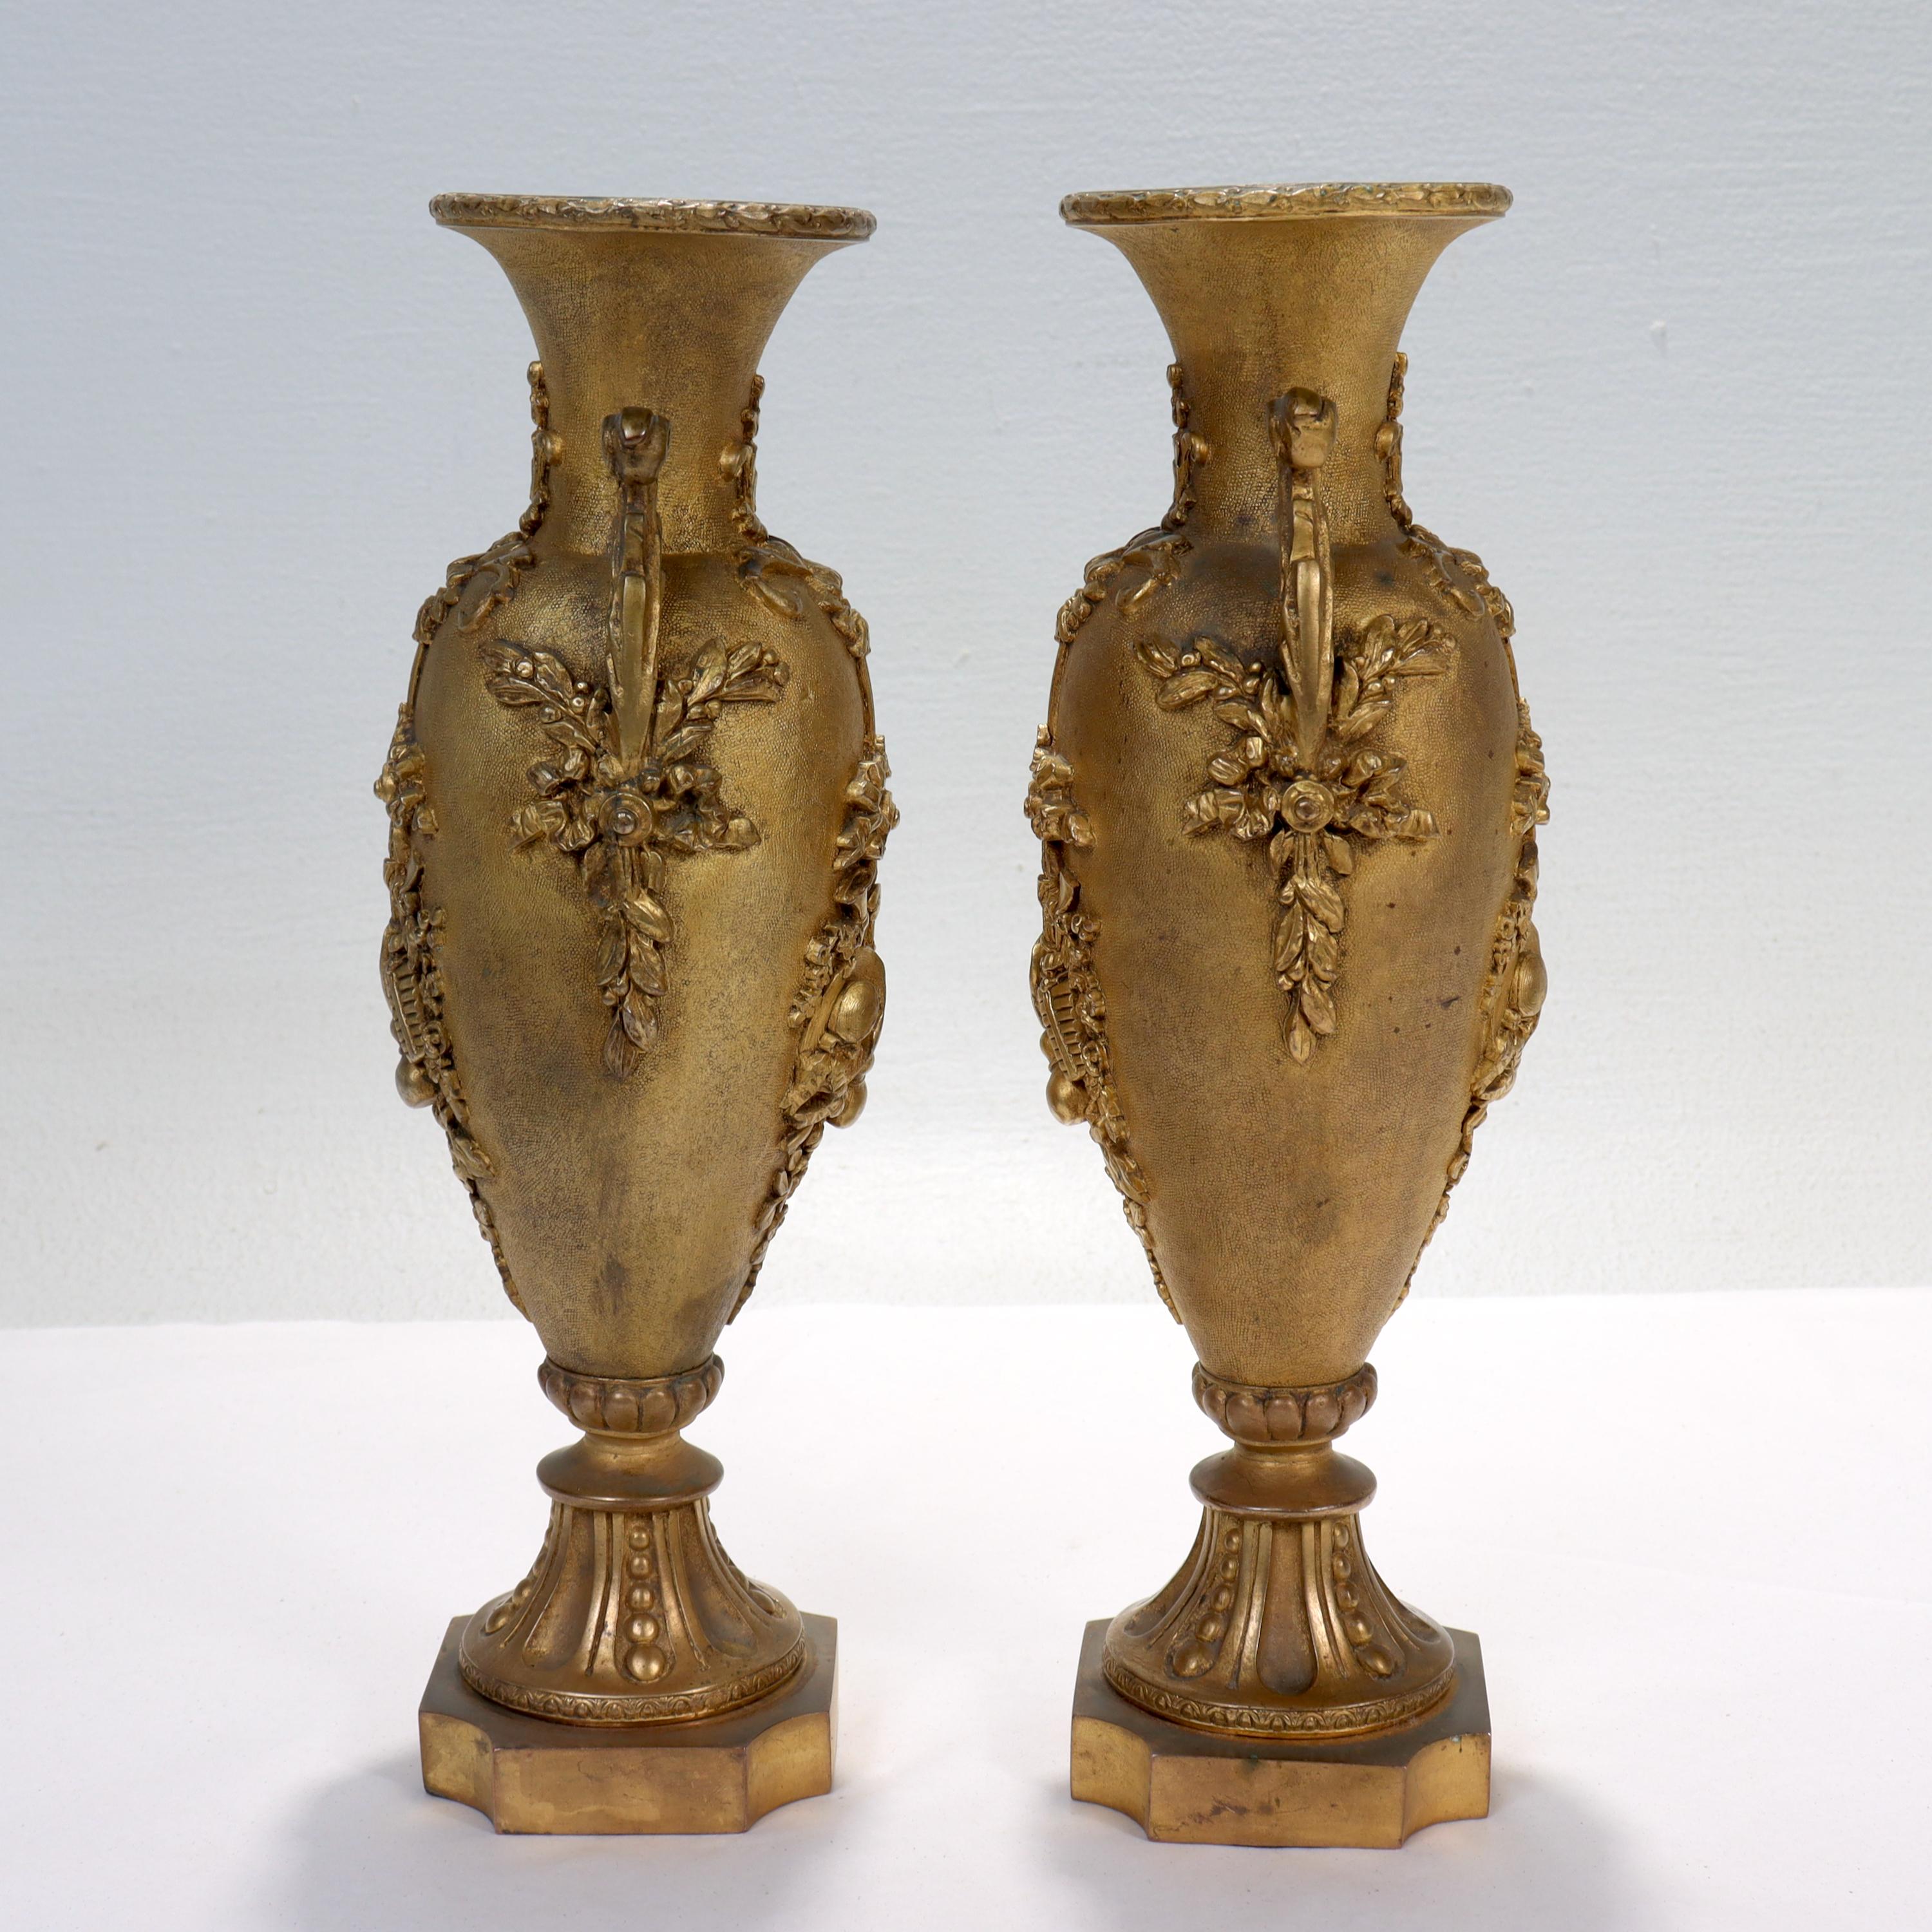 19th Century Antique Second Empire French Doré Gilt Bronze Vases or Urns For Sale